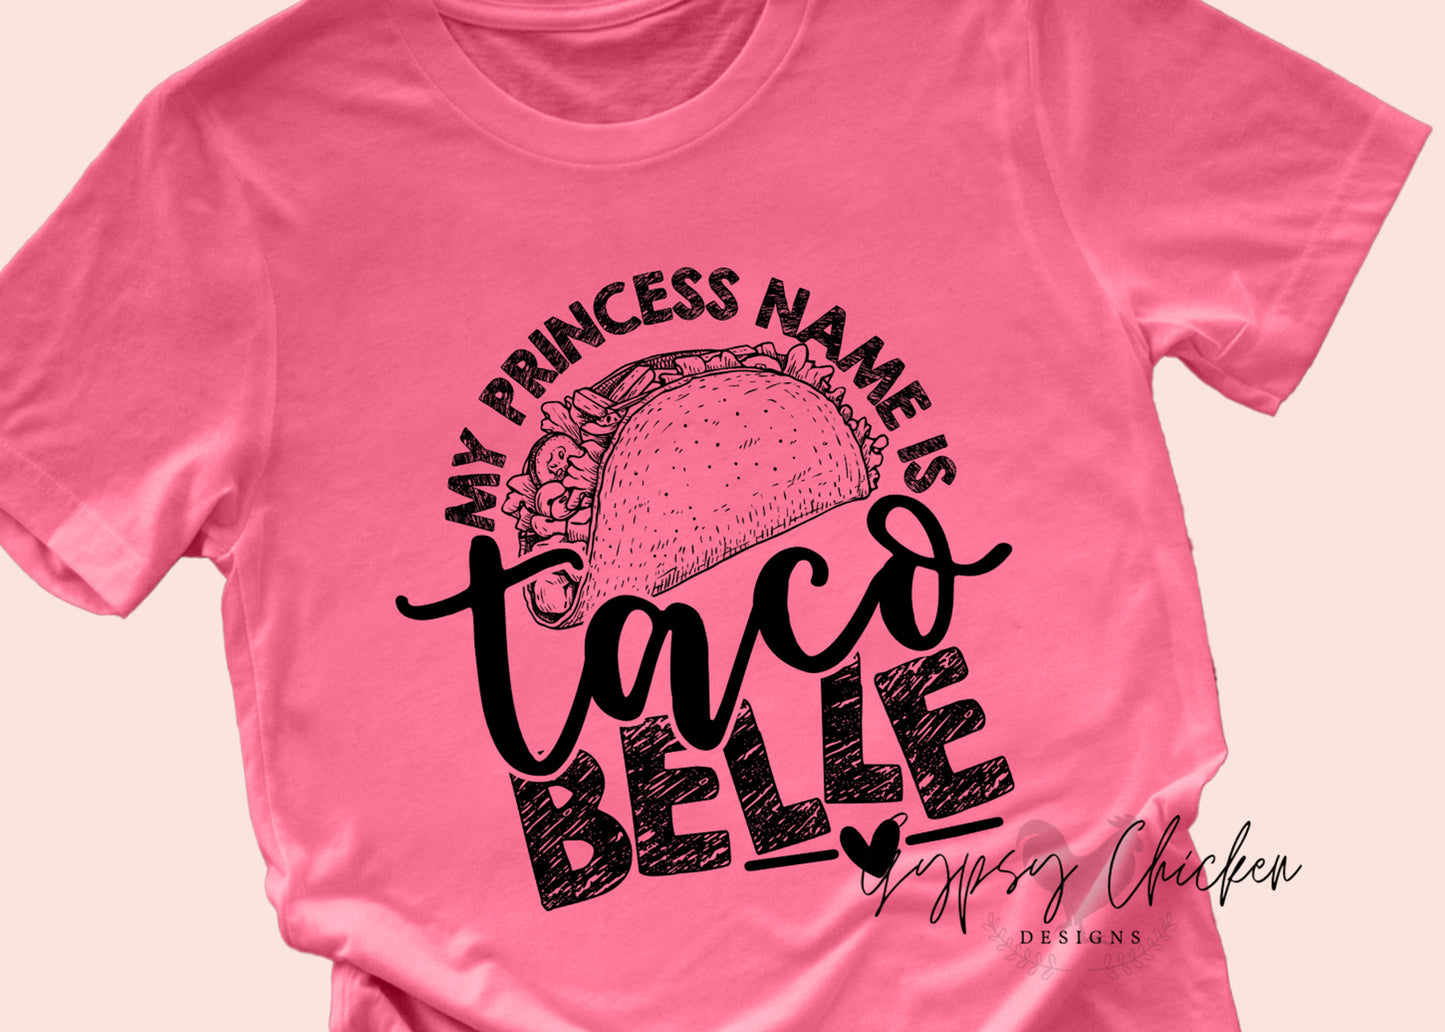 Princess Name is Taco Belle